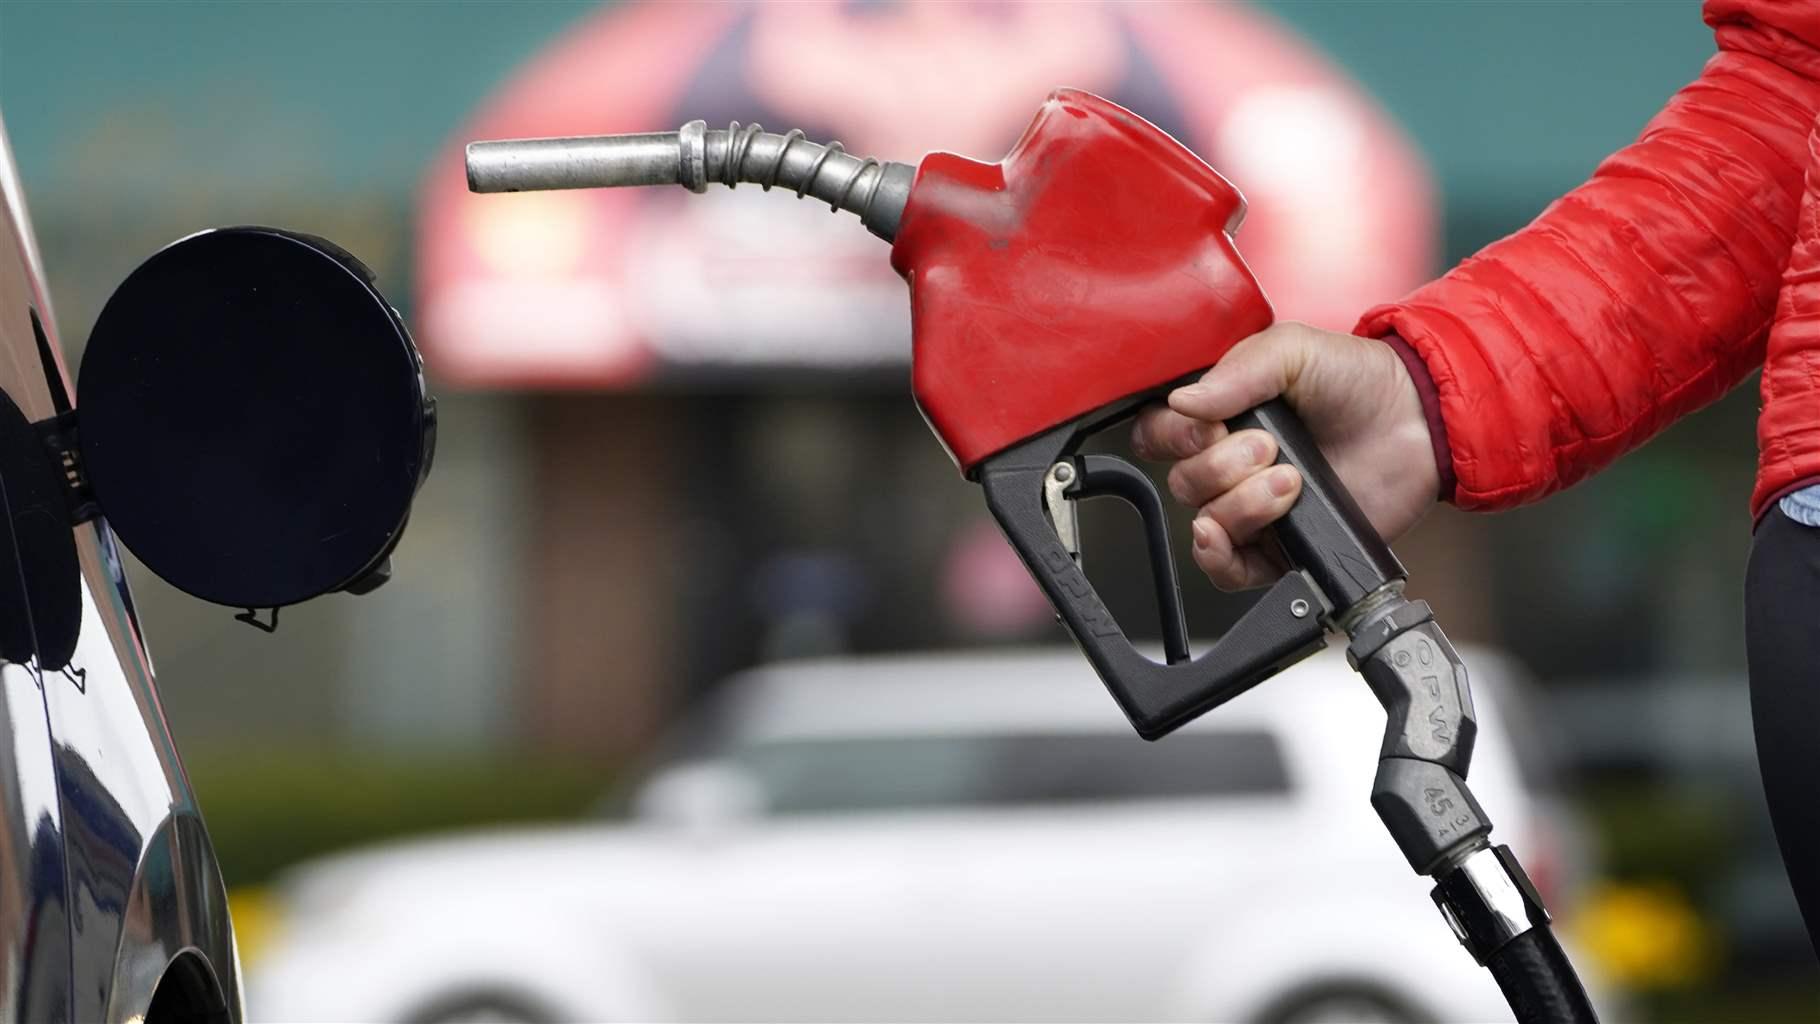 A motorist prepares to pump gas. A New Mexico high court last month ruled that service stations can be sued if they sell gas to drivers who are intoxicated.